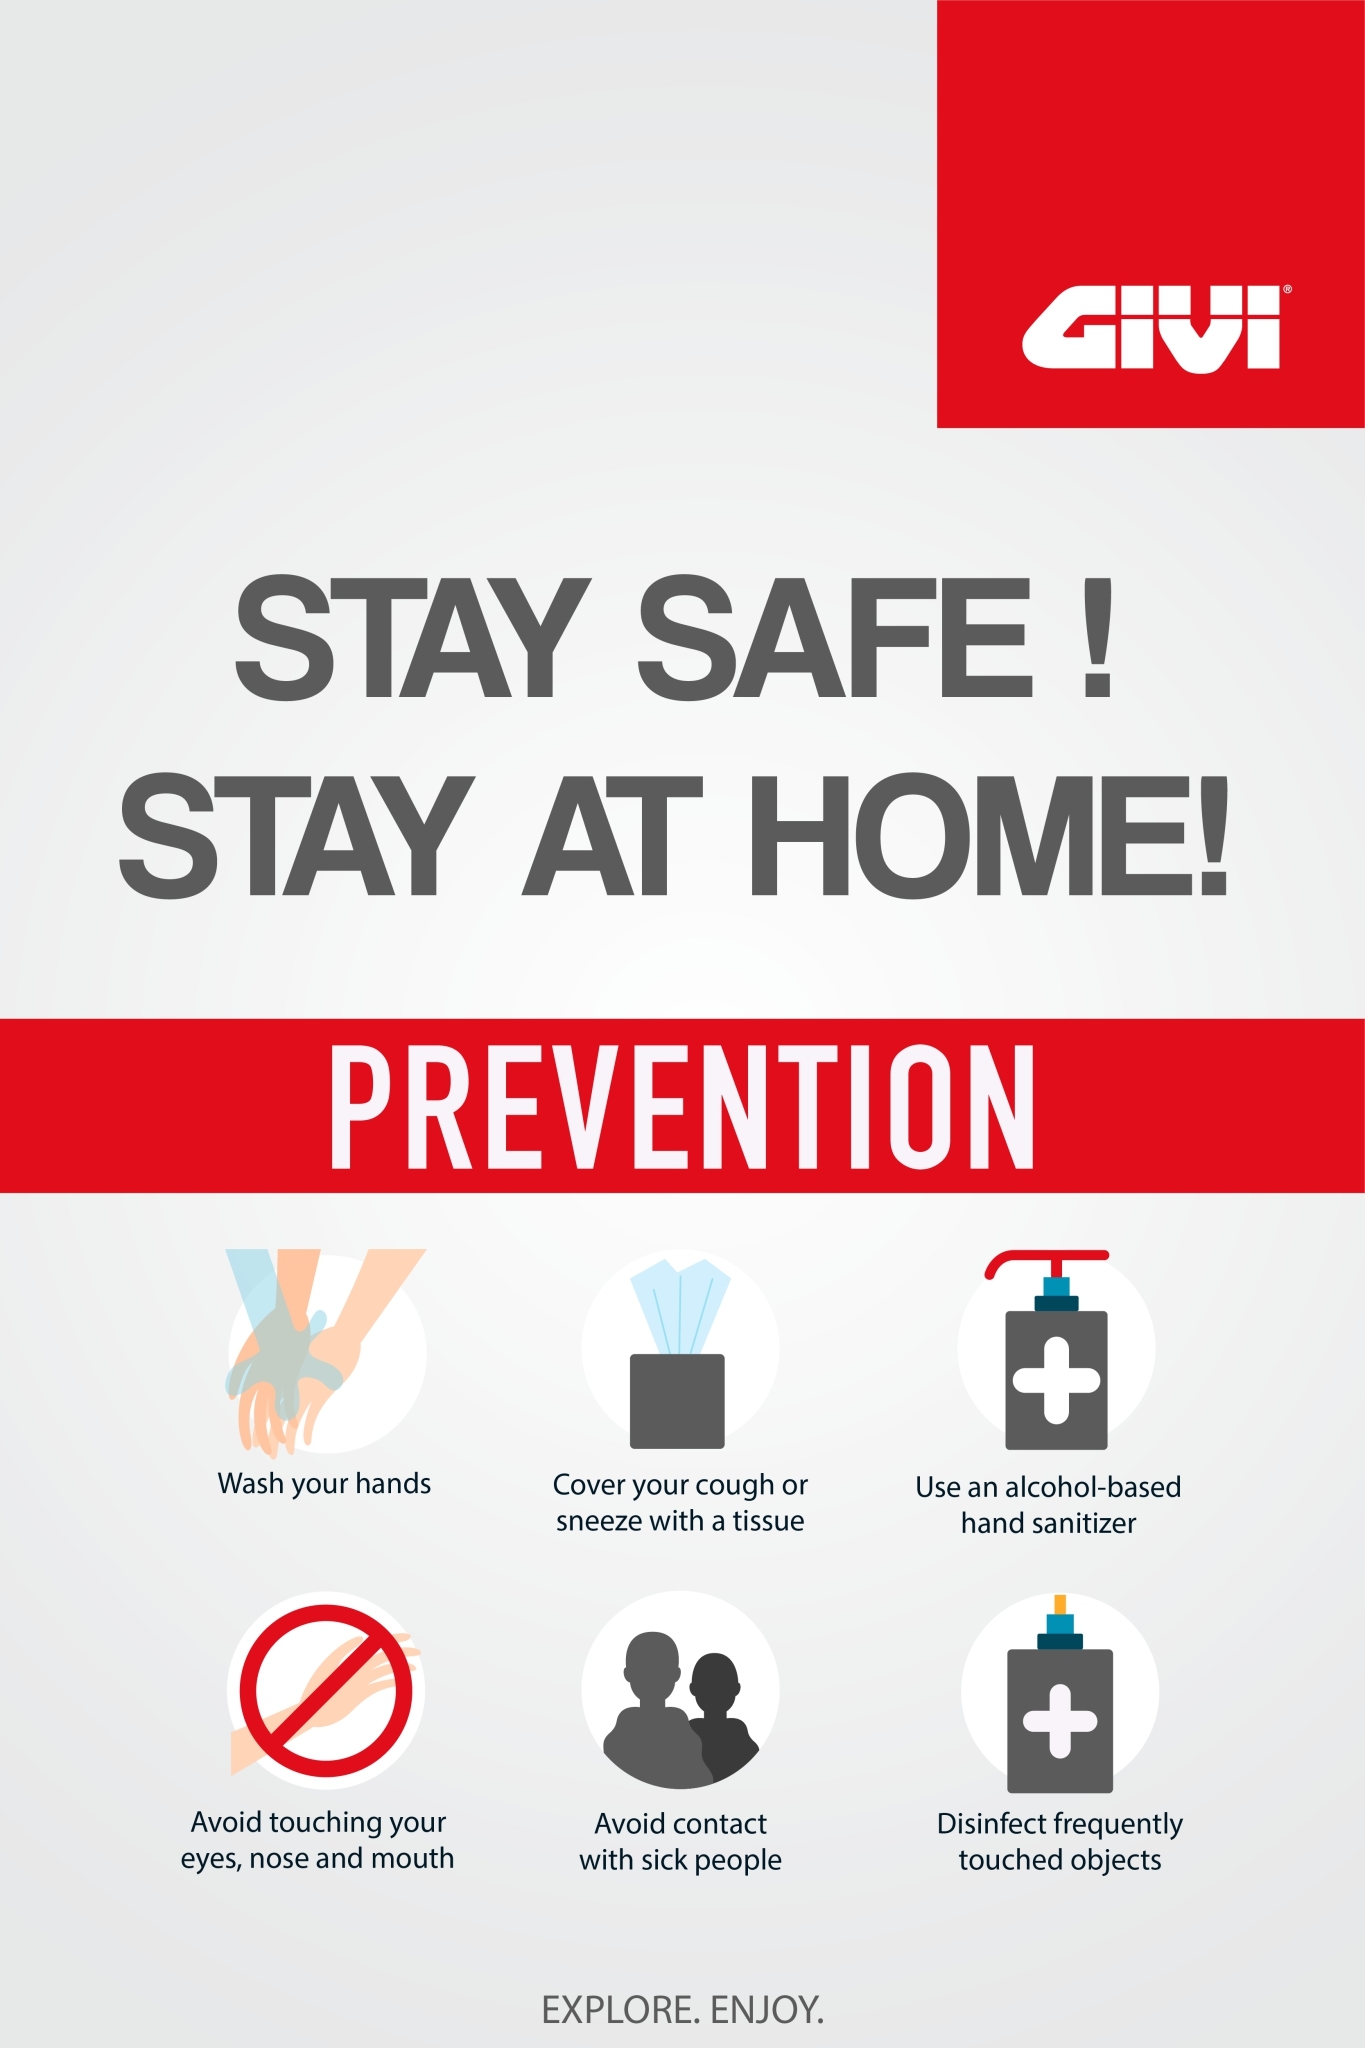 Covid-19 Prevention message from GIVI